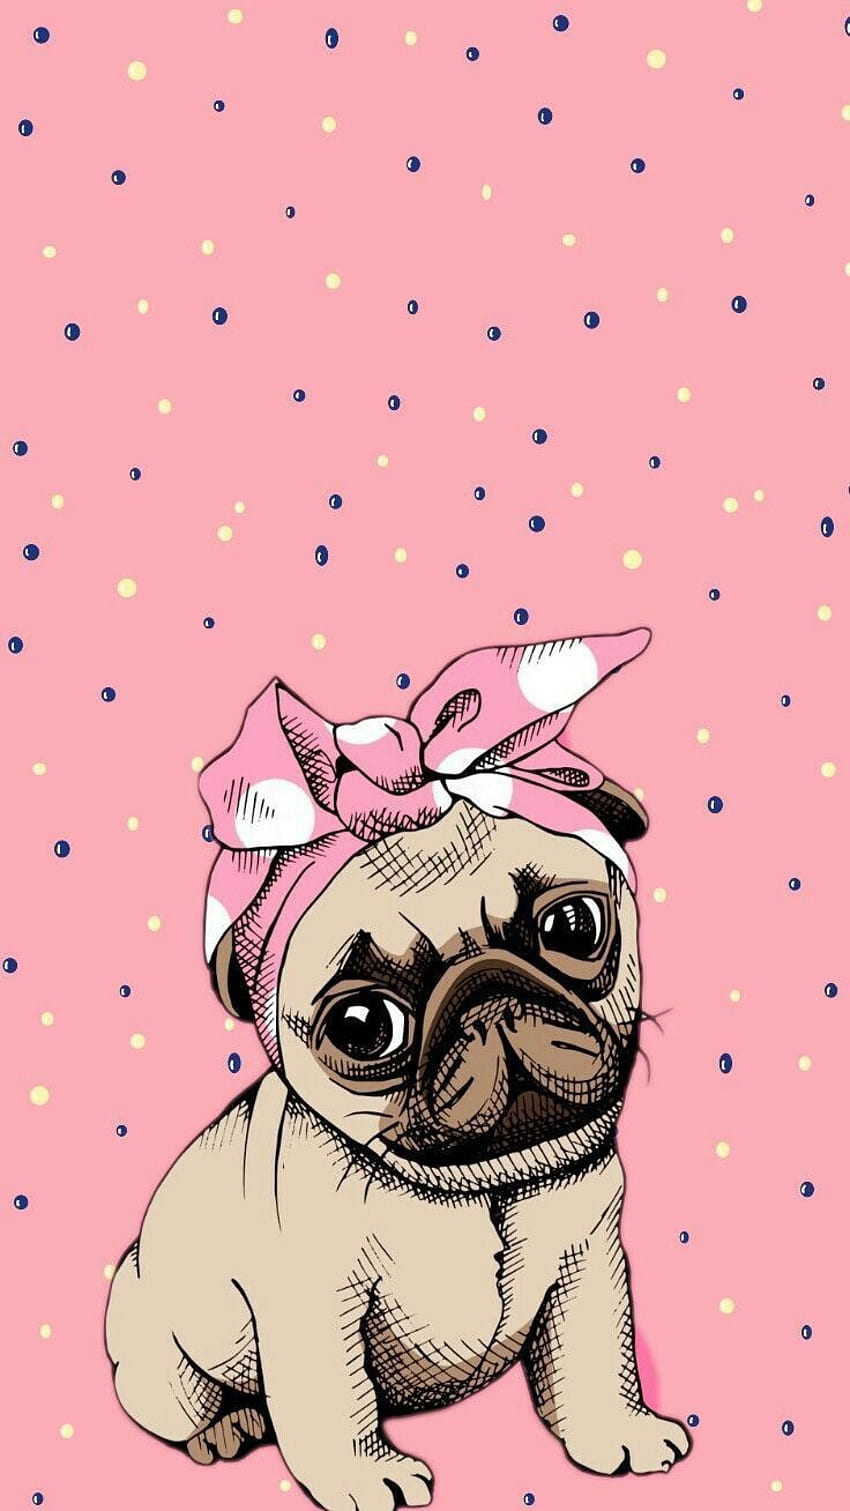 Cute cartoon pug dog which would look great as an adorable HD phone wallpaper